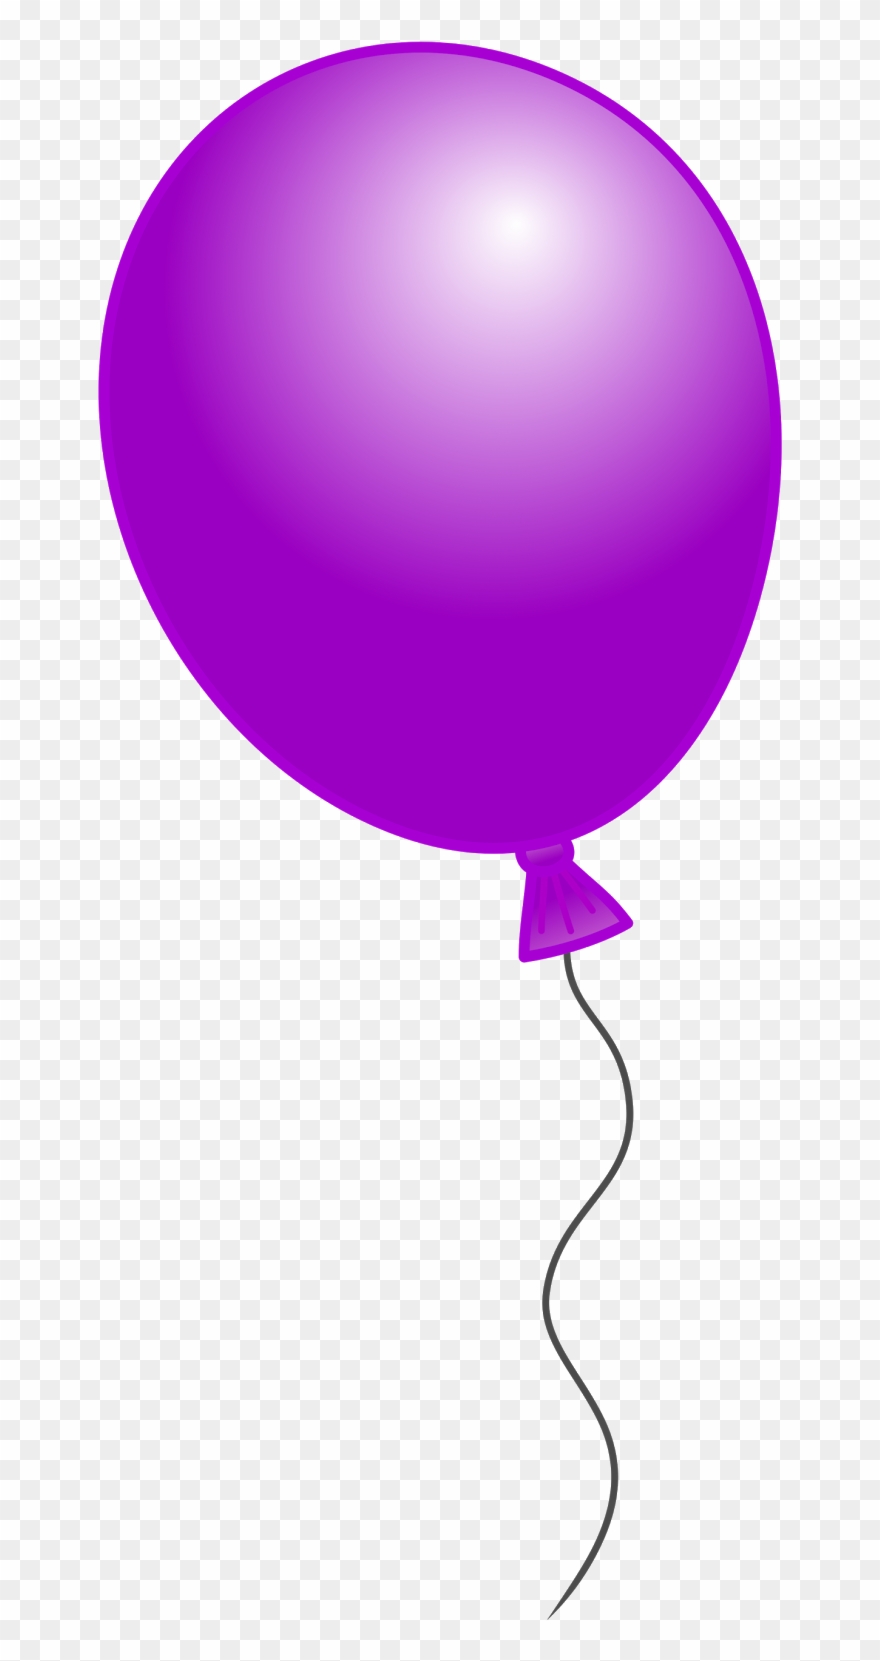 Balloon clipart number.